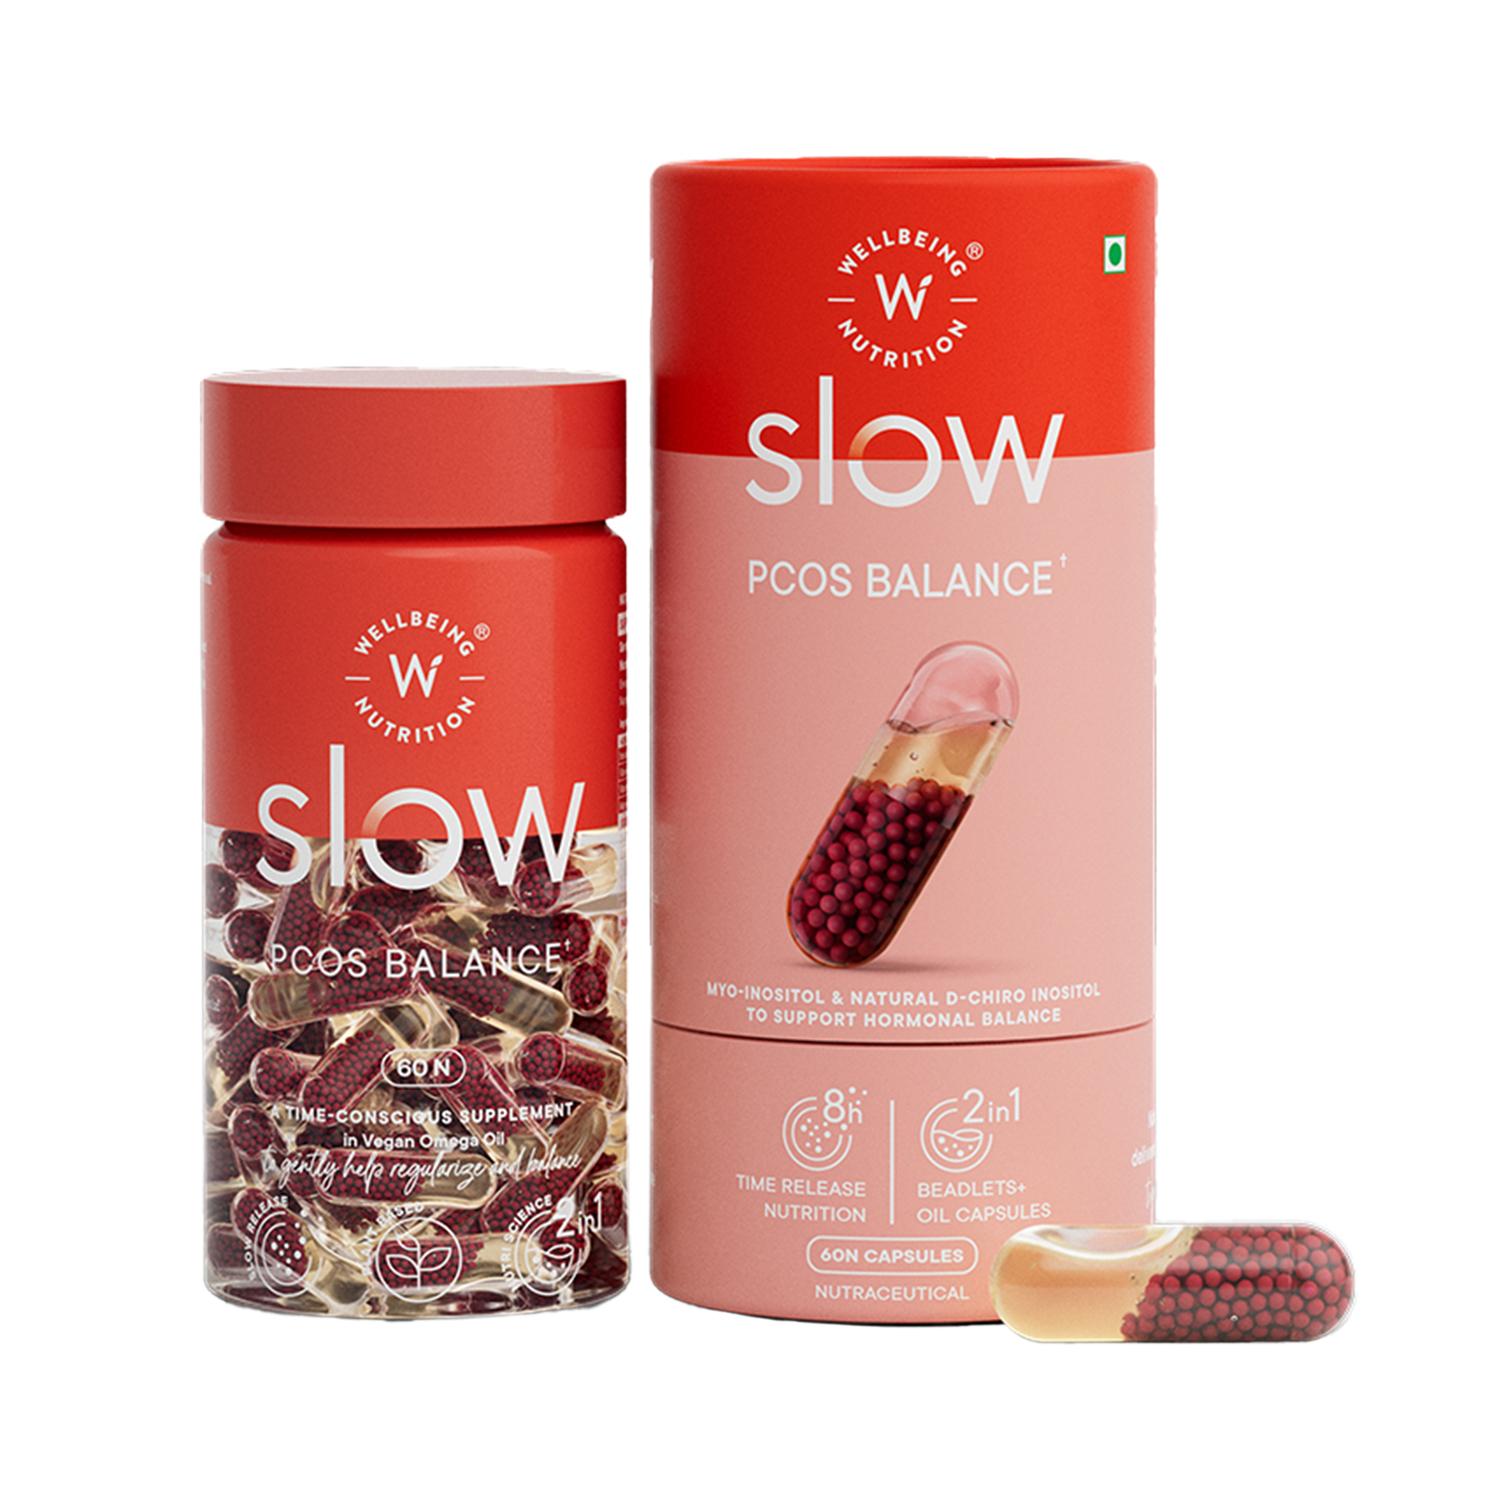 Wellbeing Nutrition | Wellbeing Nutrition Slow PCOS Supplement Veg Capsules for Women Caronositol Weight Management